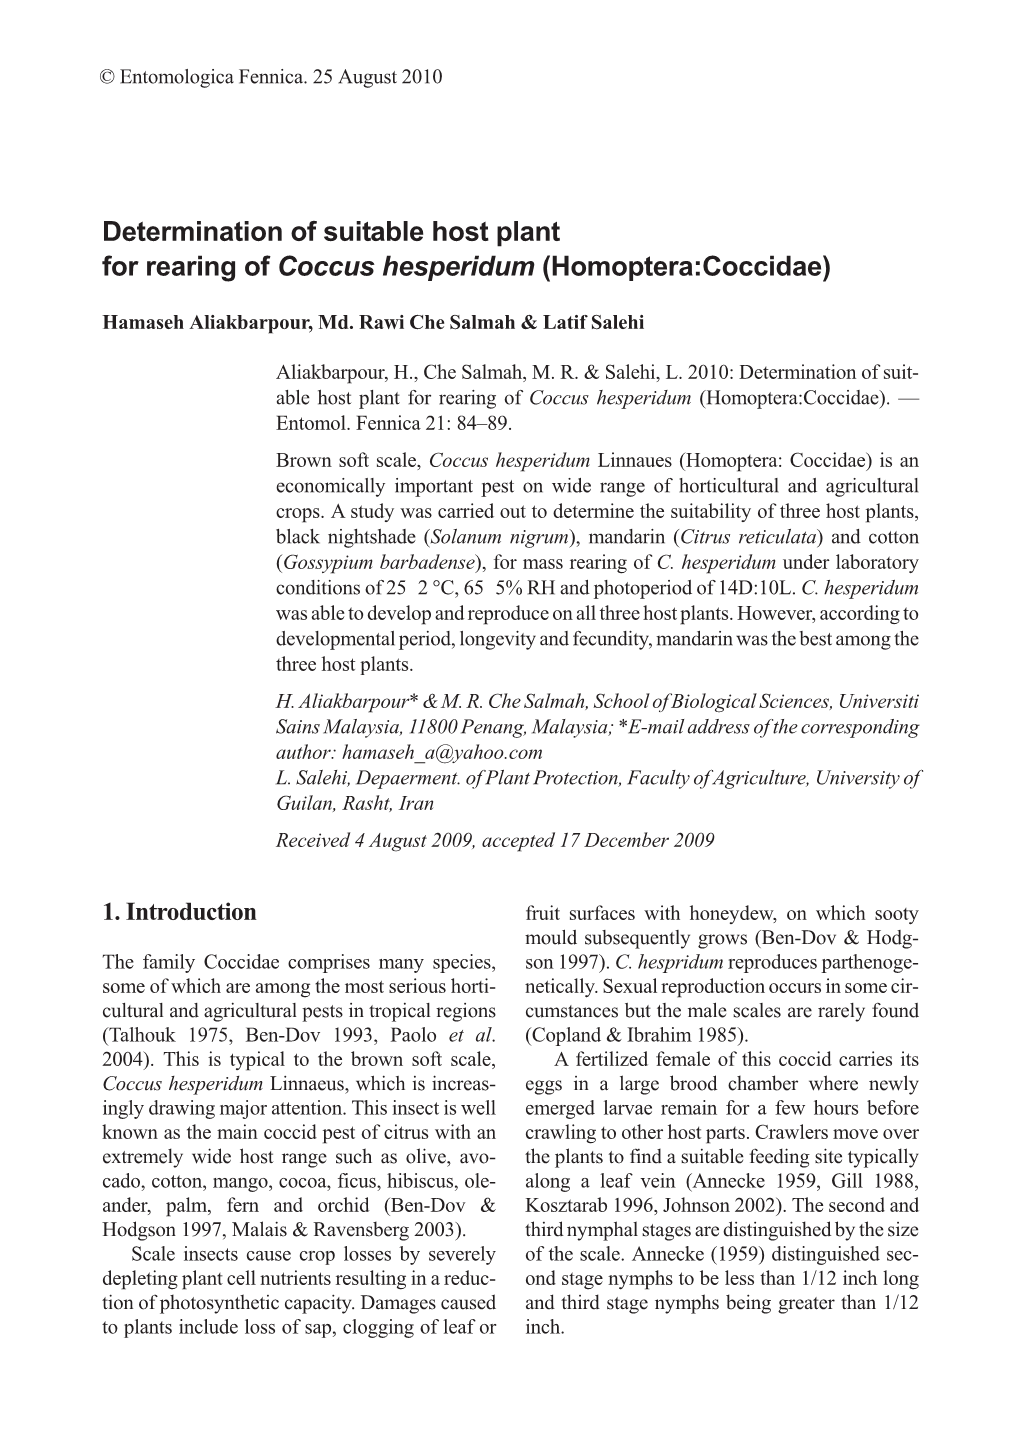 Determination of Suitable Host Plant for Rearing of Coccus Hesperidum (Homoptera:Coccidae)